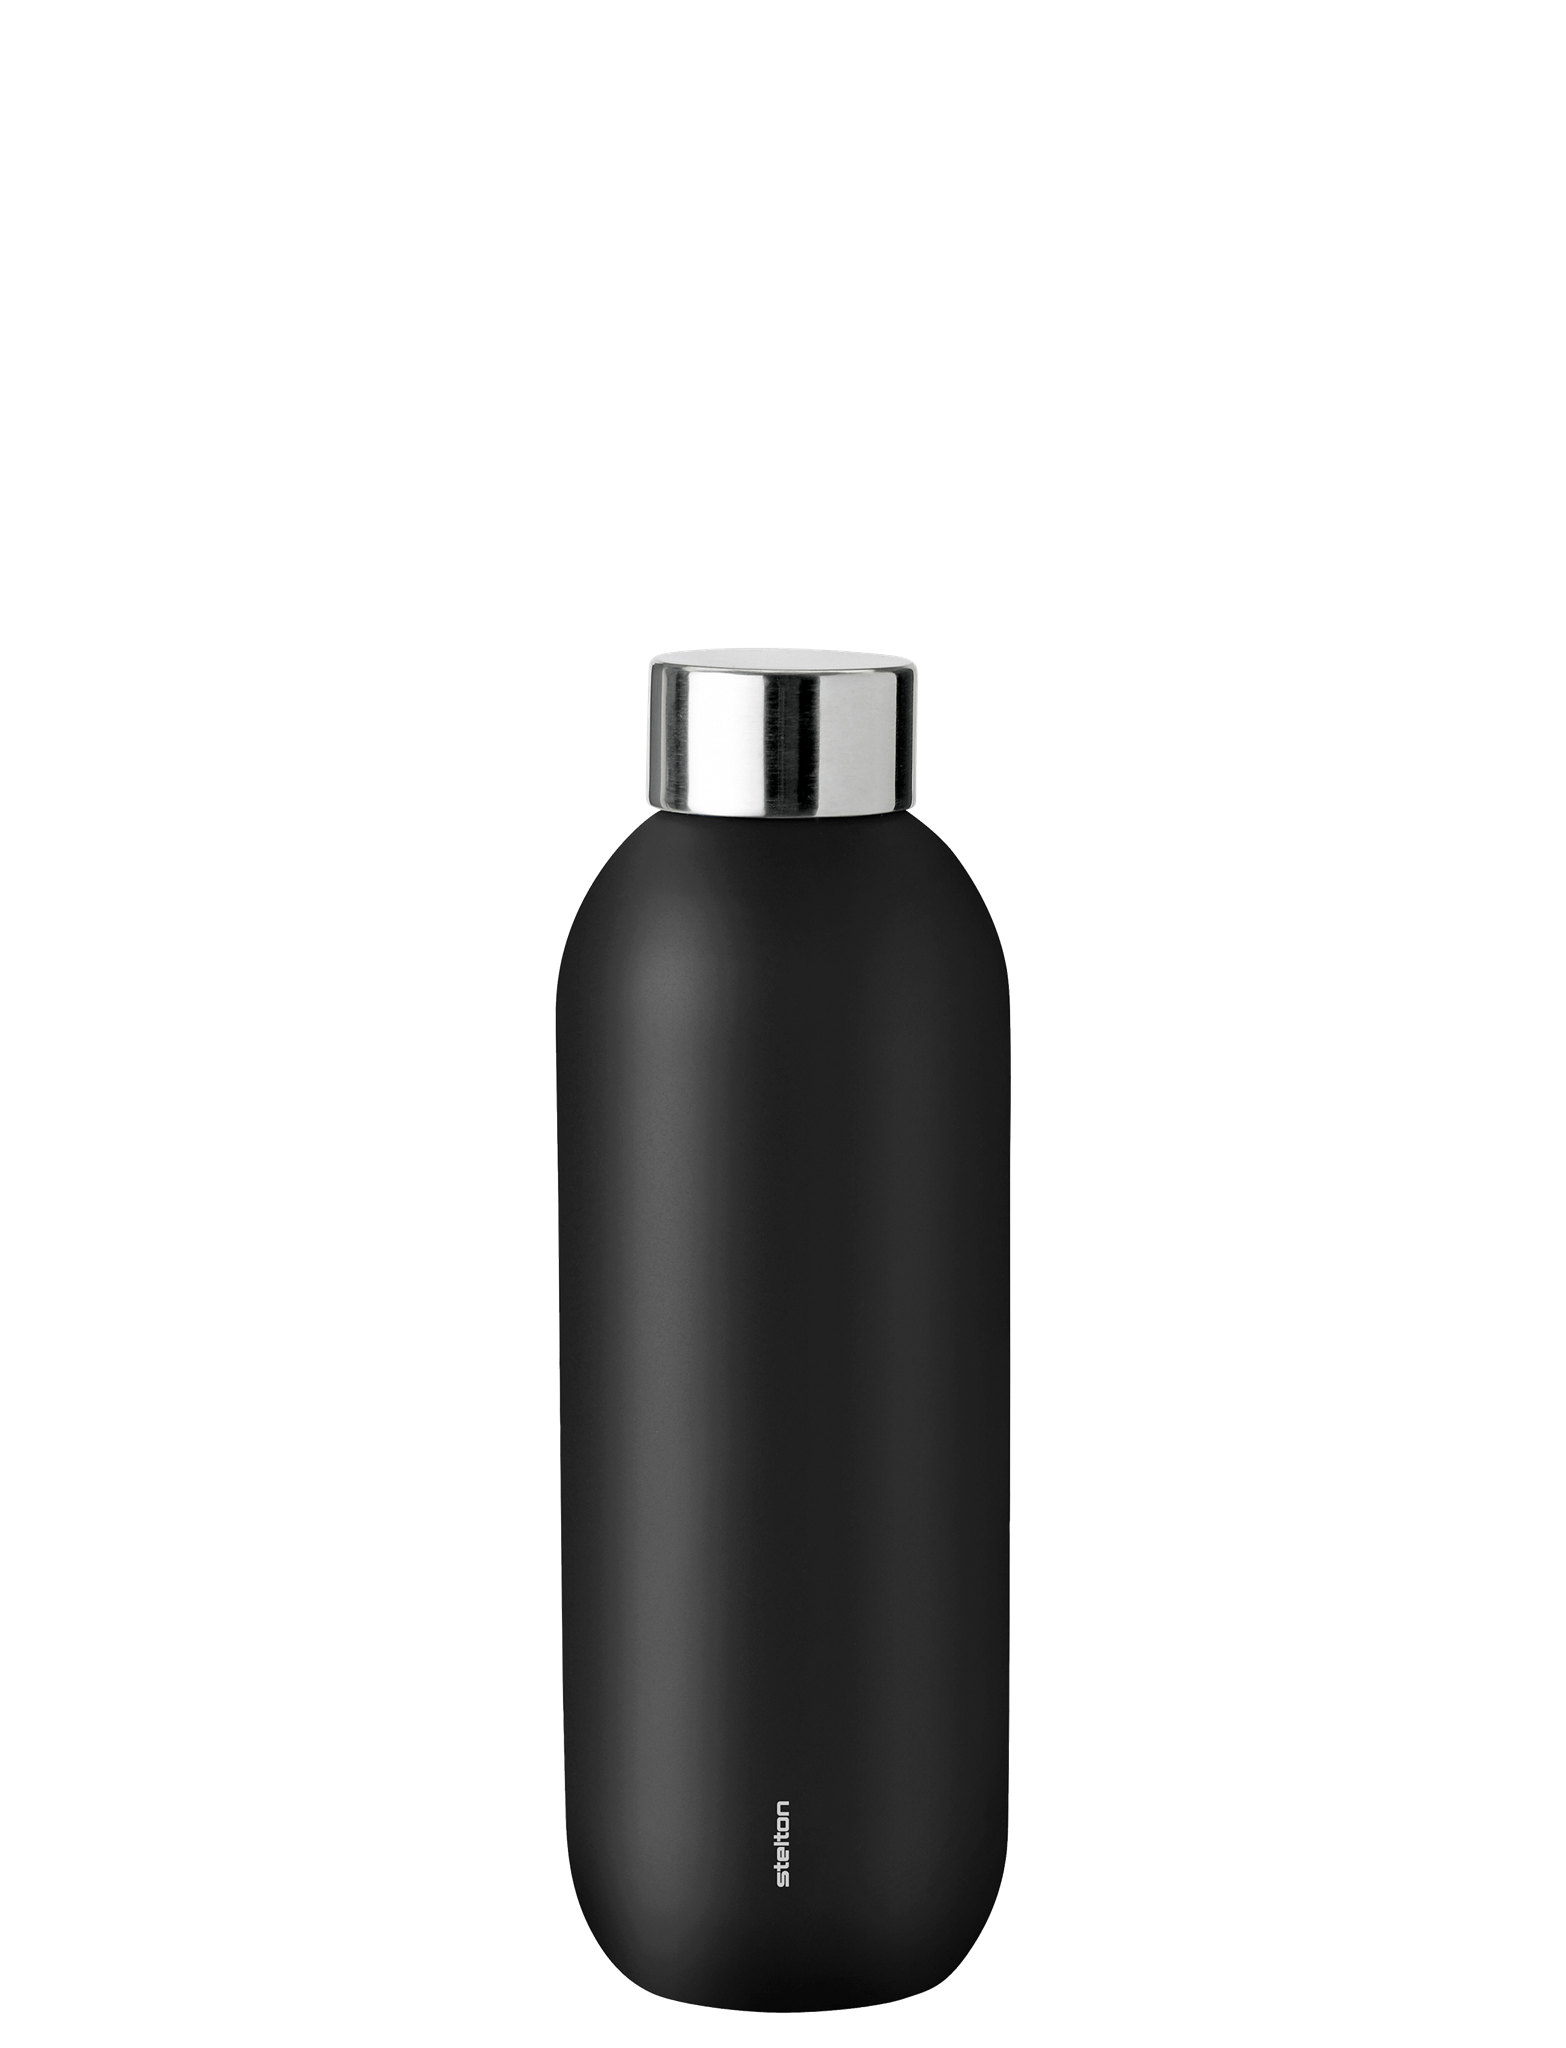 Sports Water Bottle Keep Hot/cold Stainless Steel Vacuum Isotherm